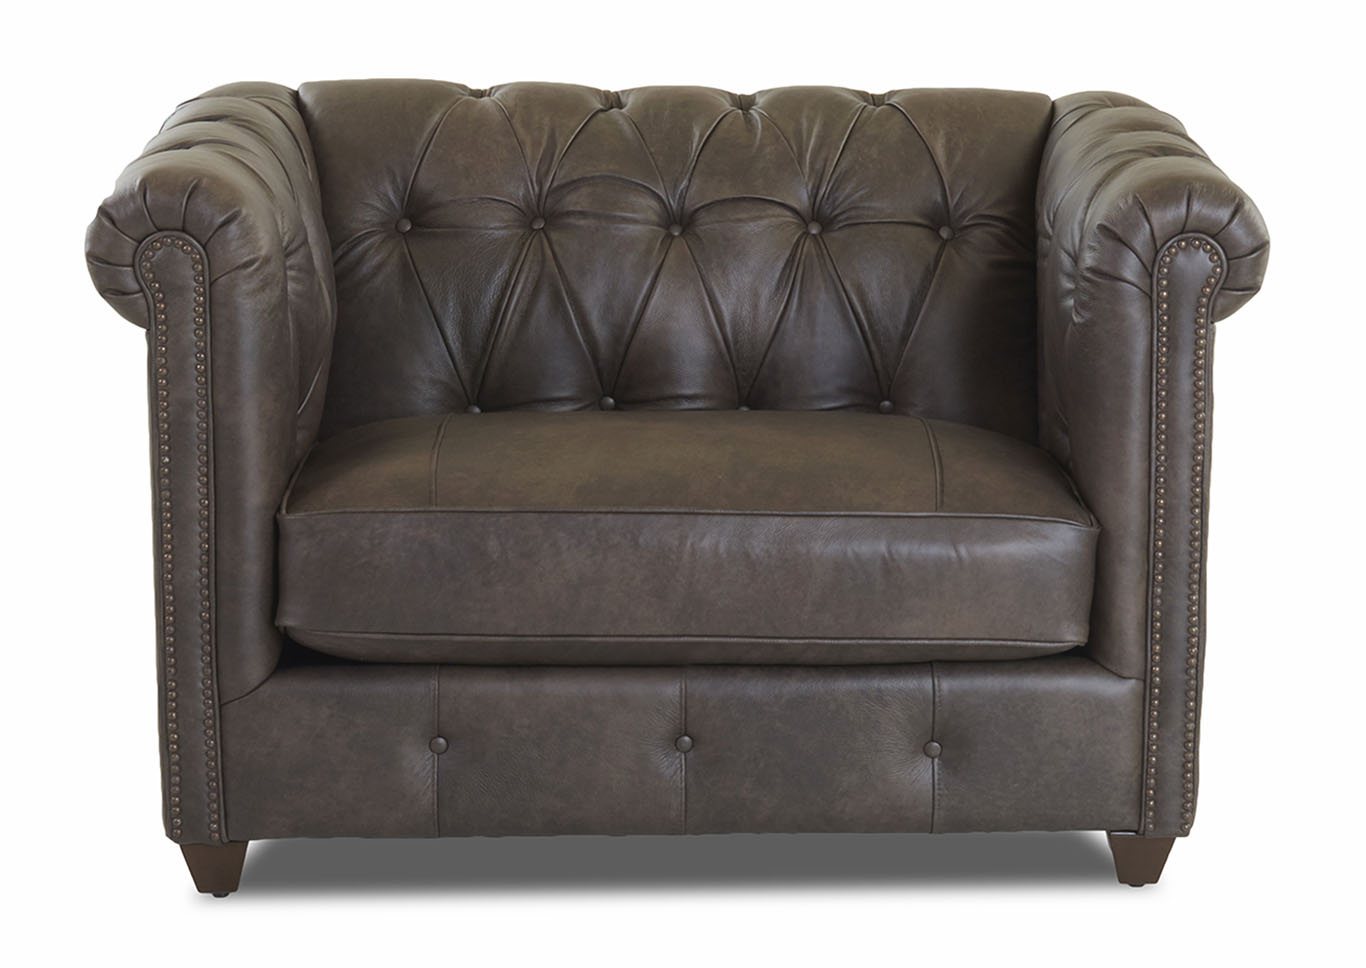 Beech Mountain Leather Stationary Sofa,Klaussner Home Furnishings